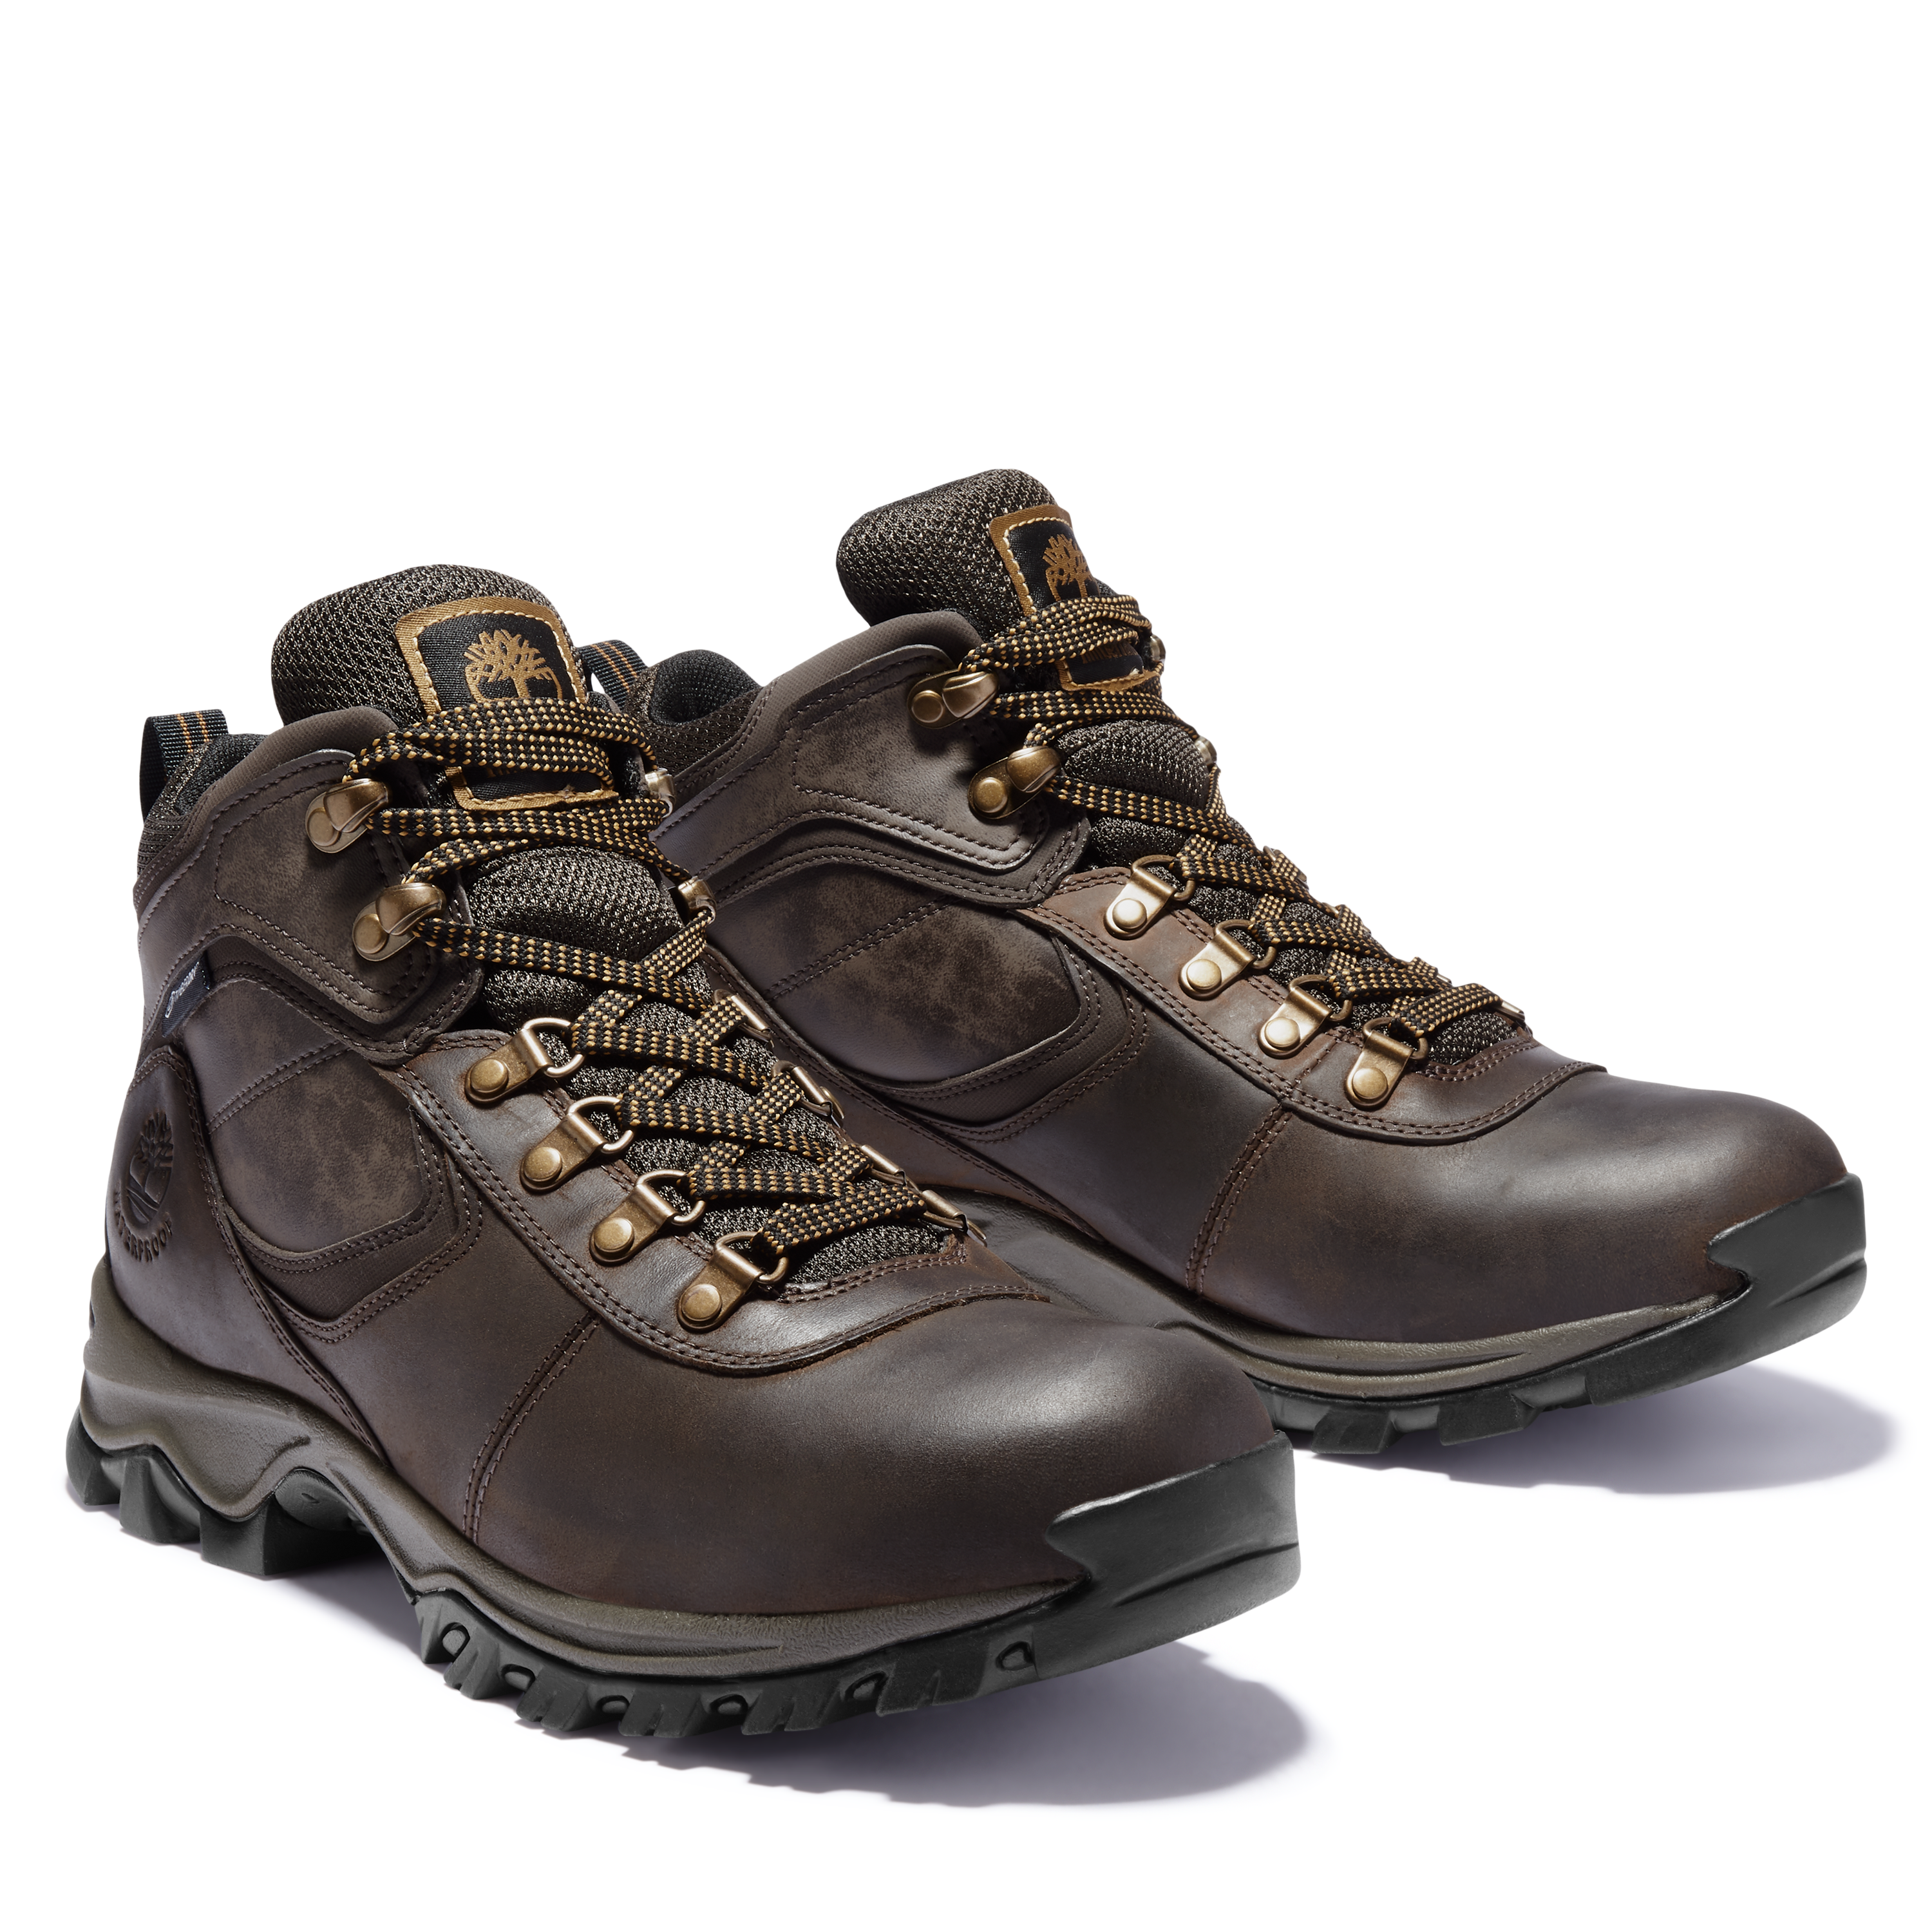 Timberland Men's MT. Maddsen Hiking Boots